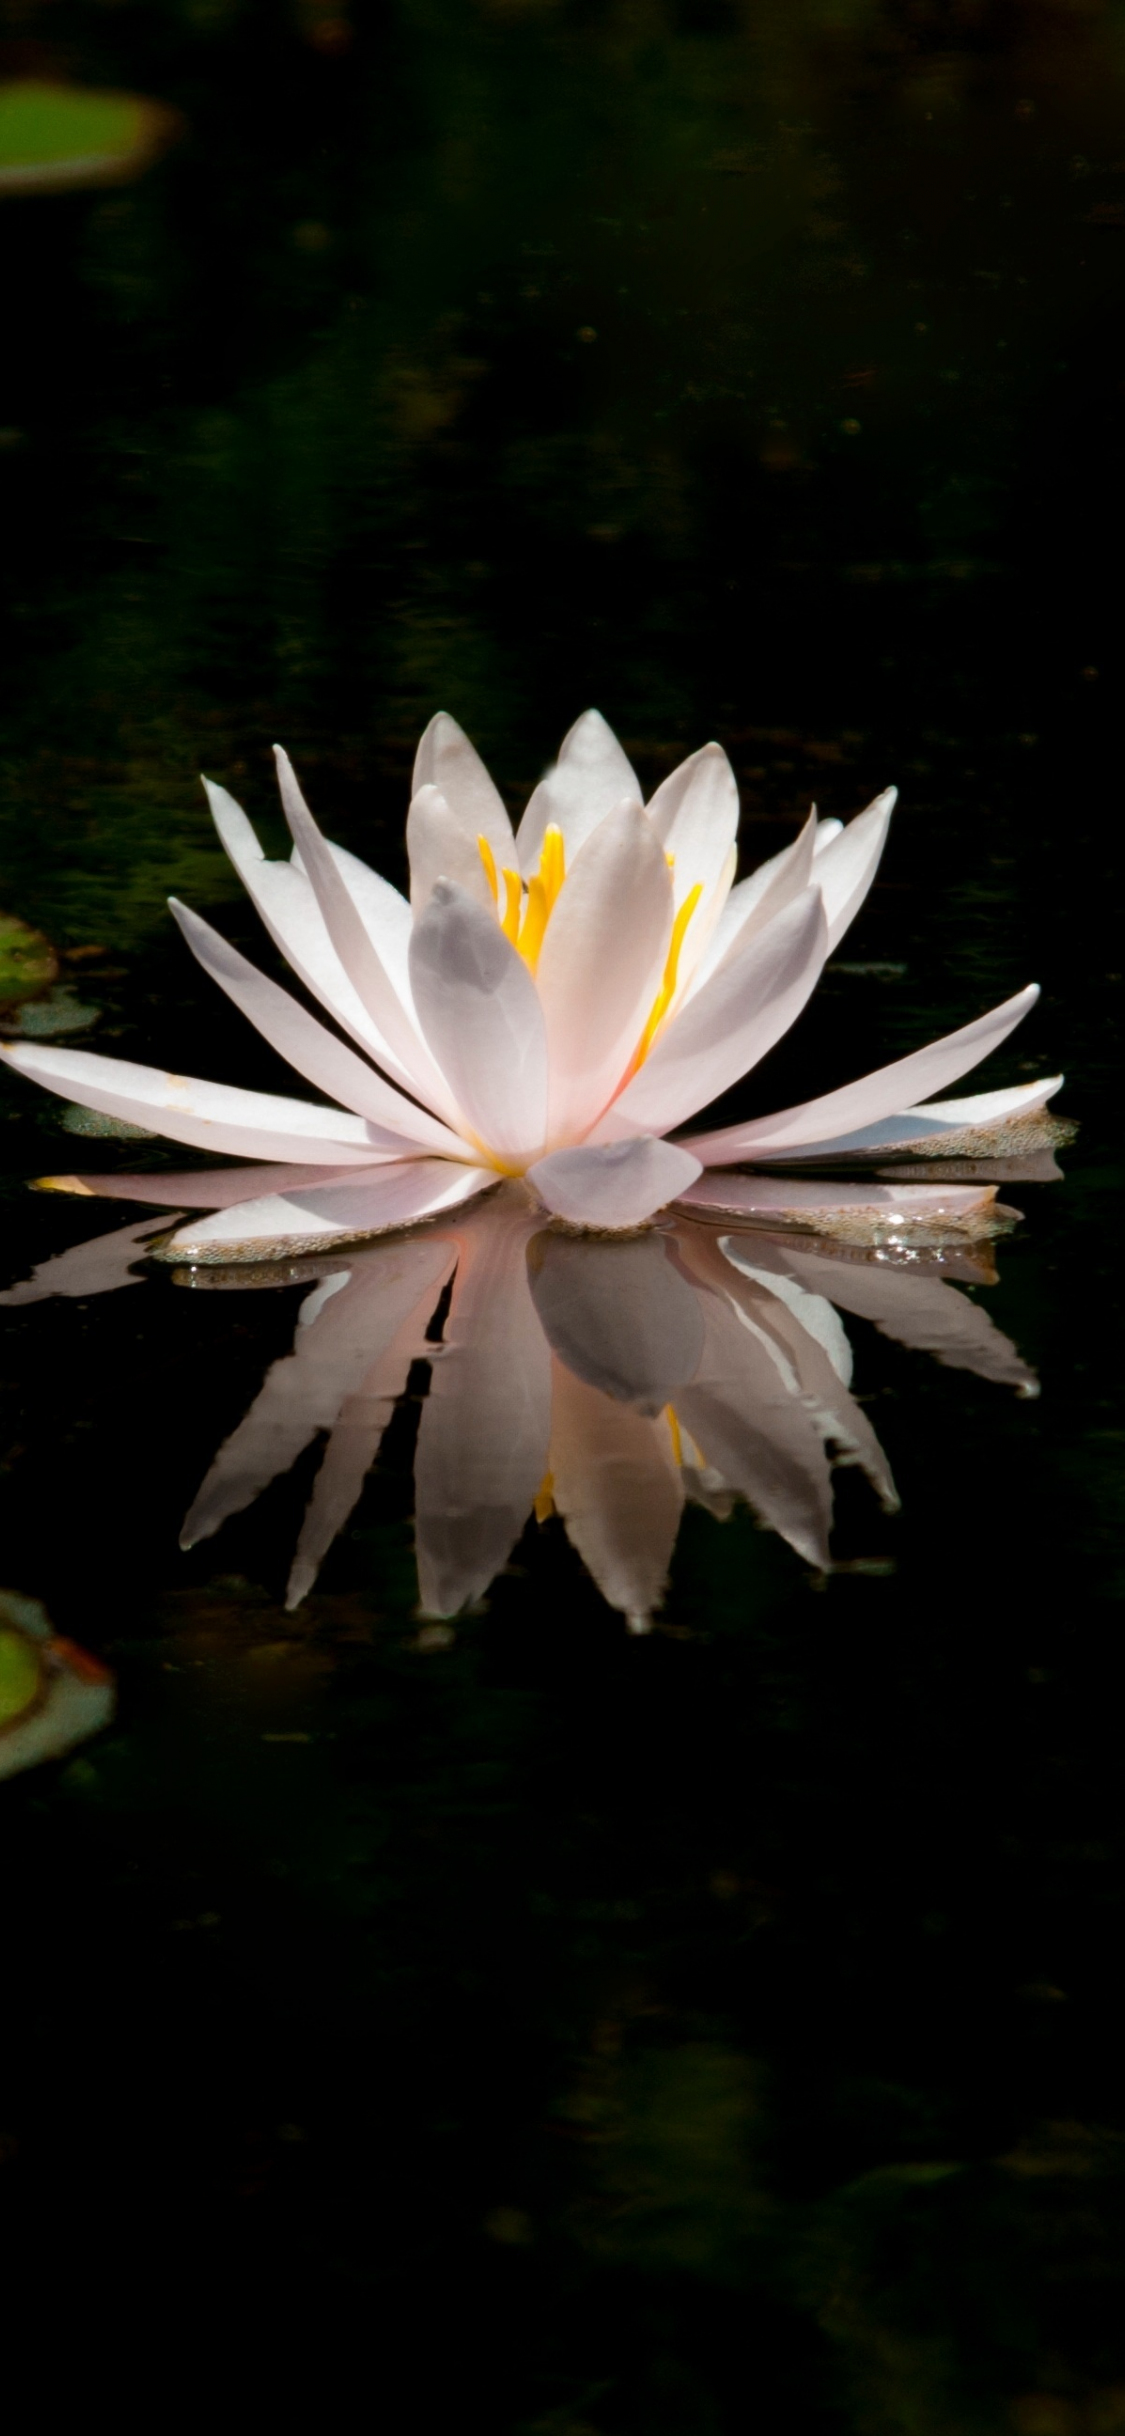 Download wallpaper 1125x2436 white, reflections, water lily, lake, flower,  iphone x, 1125x2436 hd background, 4982